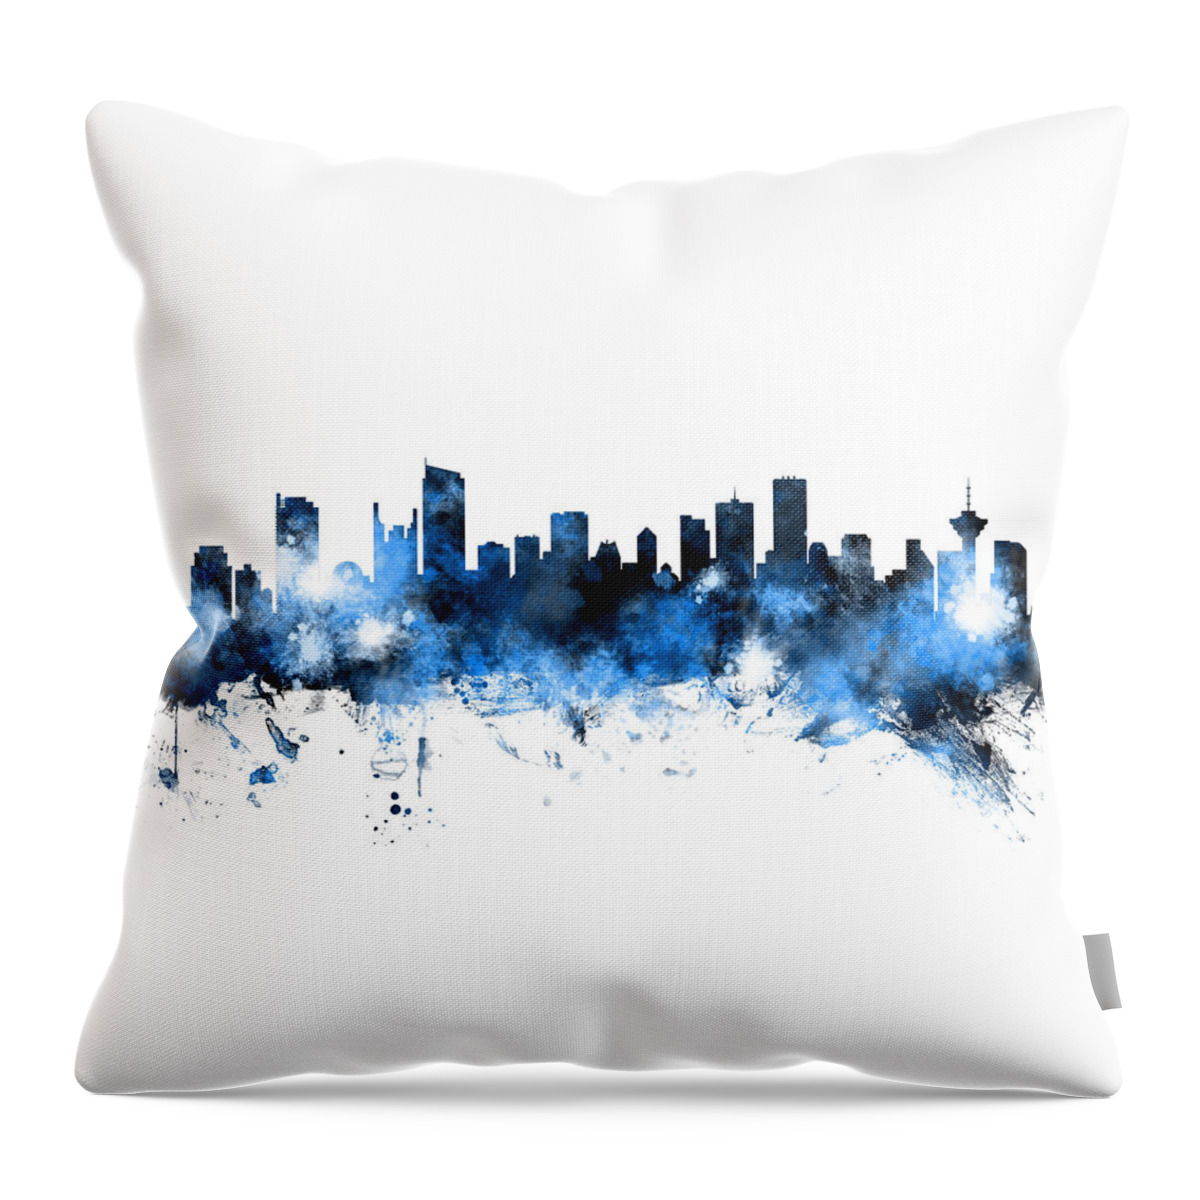 Vancouver Throw Pillow featuring the digital art Vancouver Canada Skyline Panoramic by Michael Tompsett